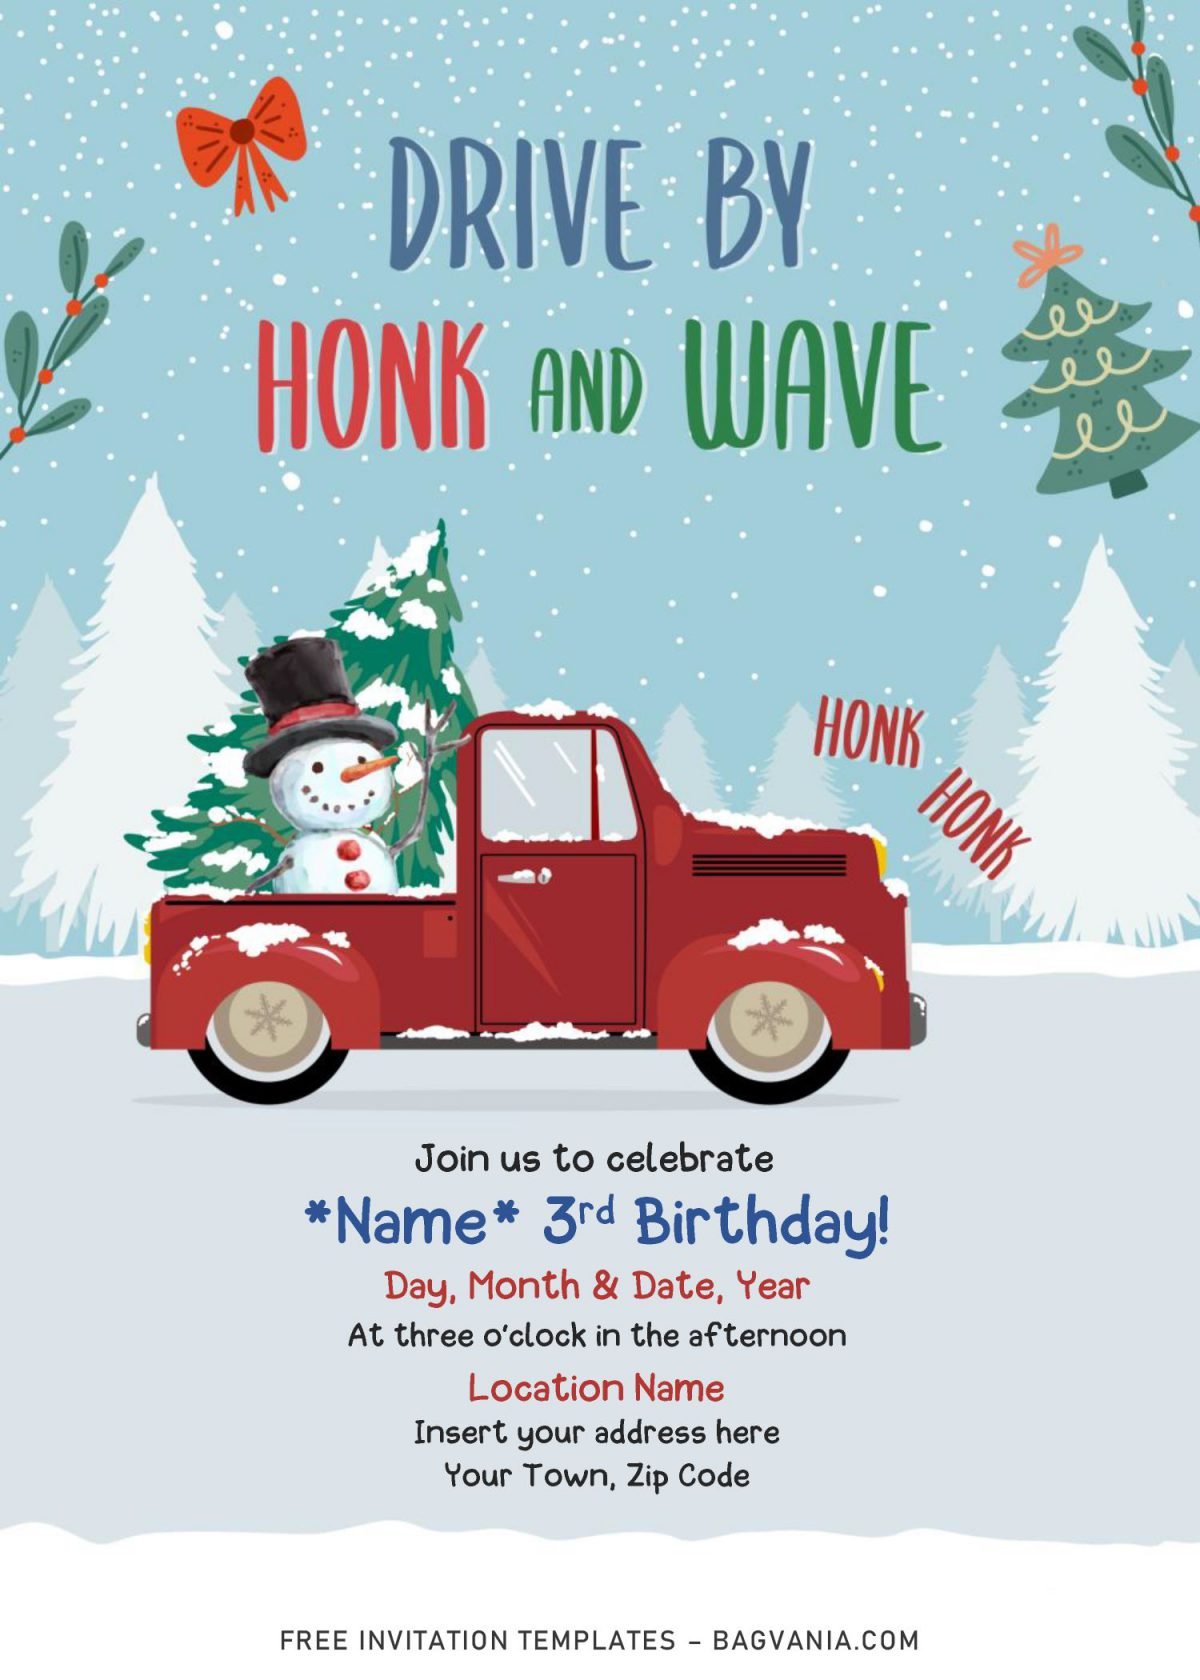 Free Winter Red Truck Drive By Birthday Party Invitation Templates For Word and has 